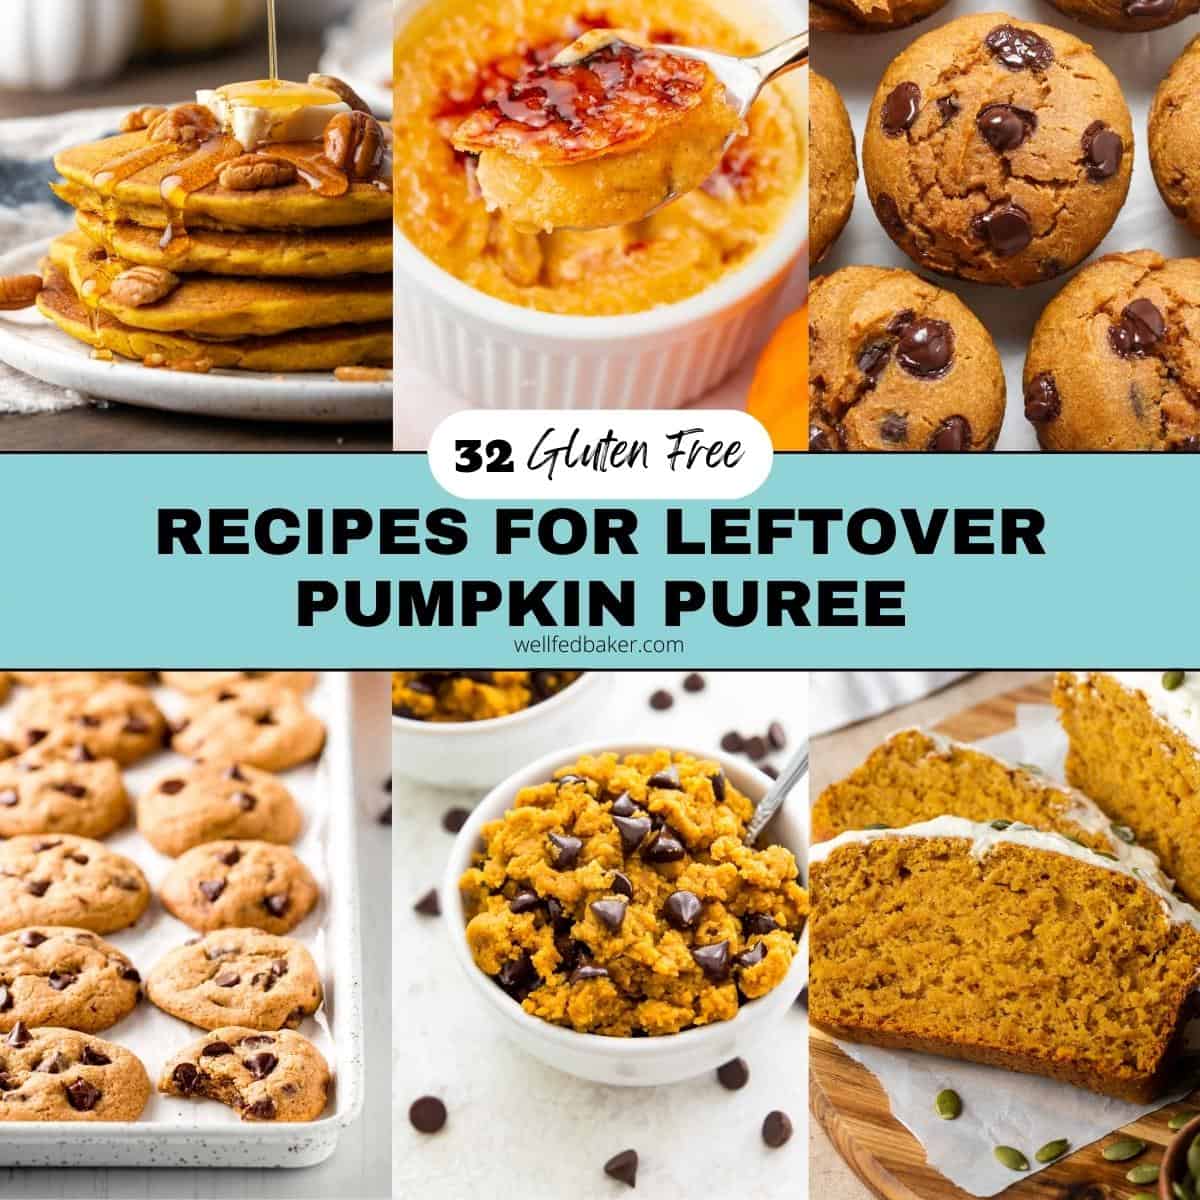 Collage image of 32 gluten free recipes for leftover pumpkin puree